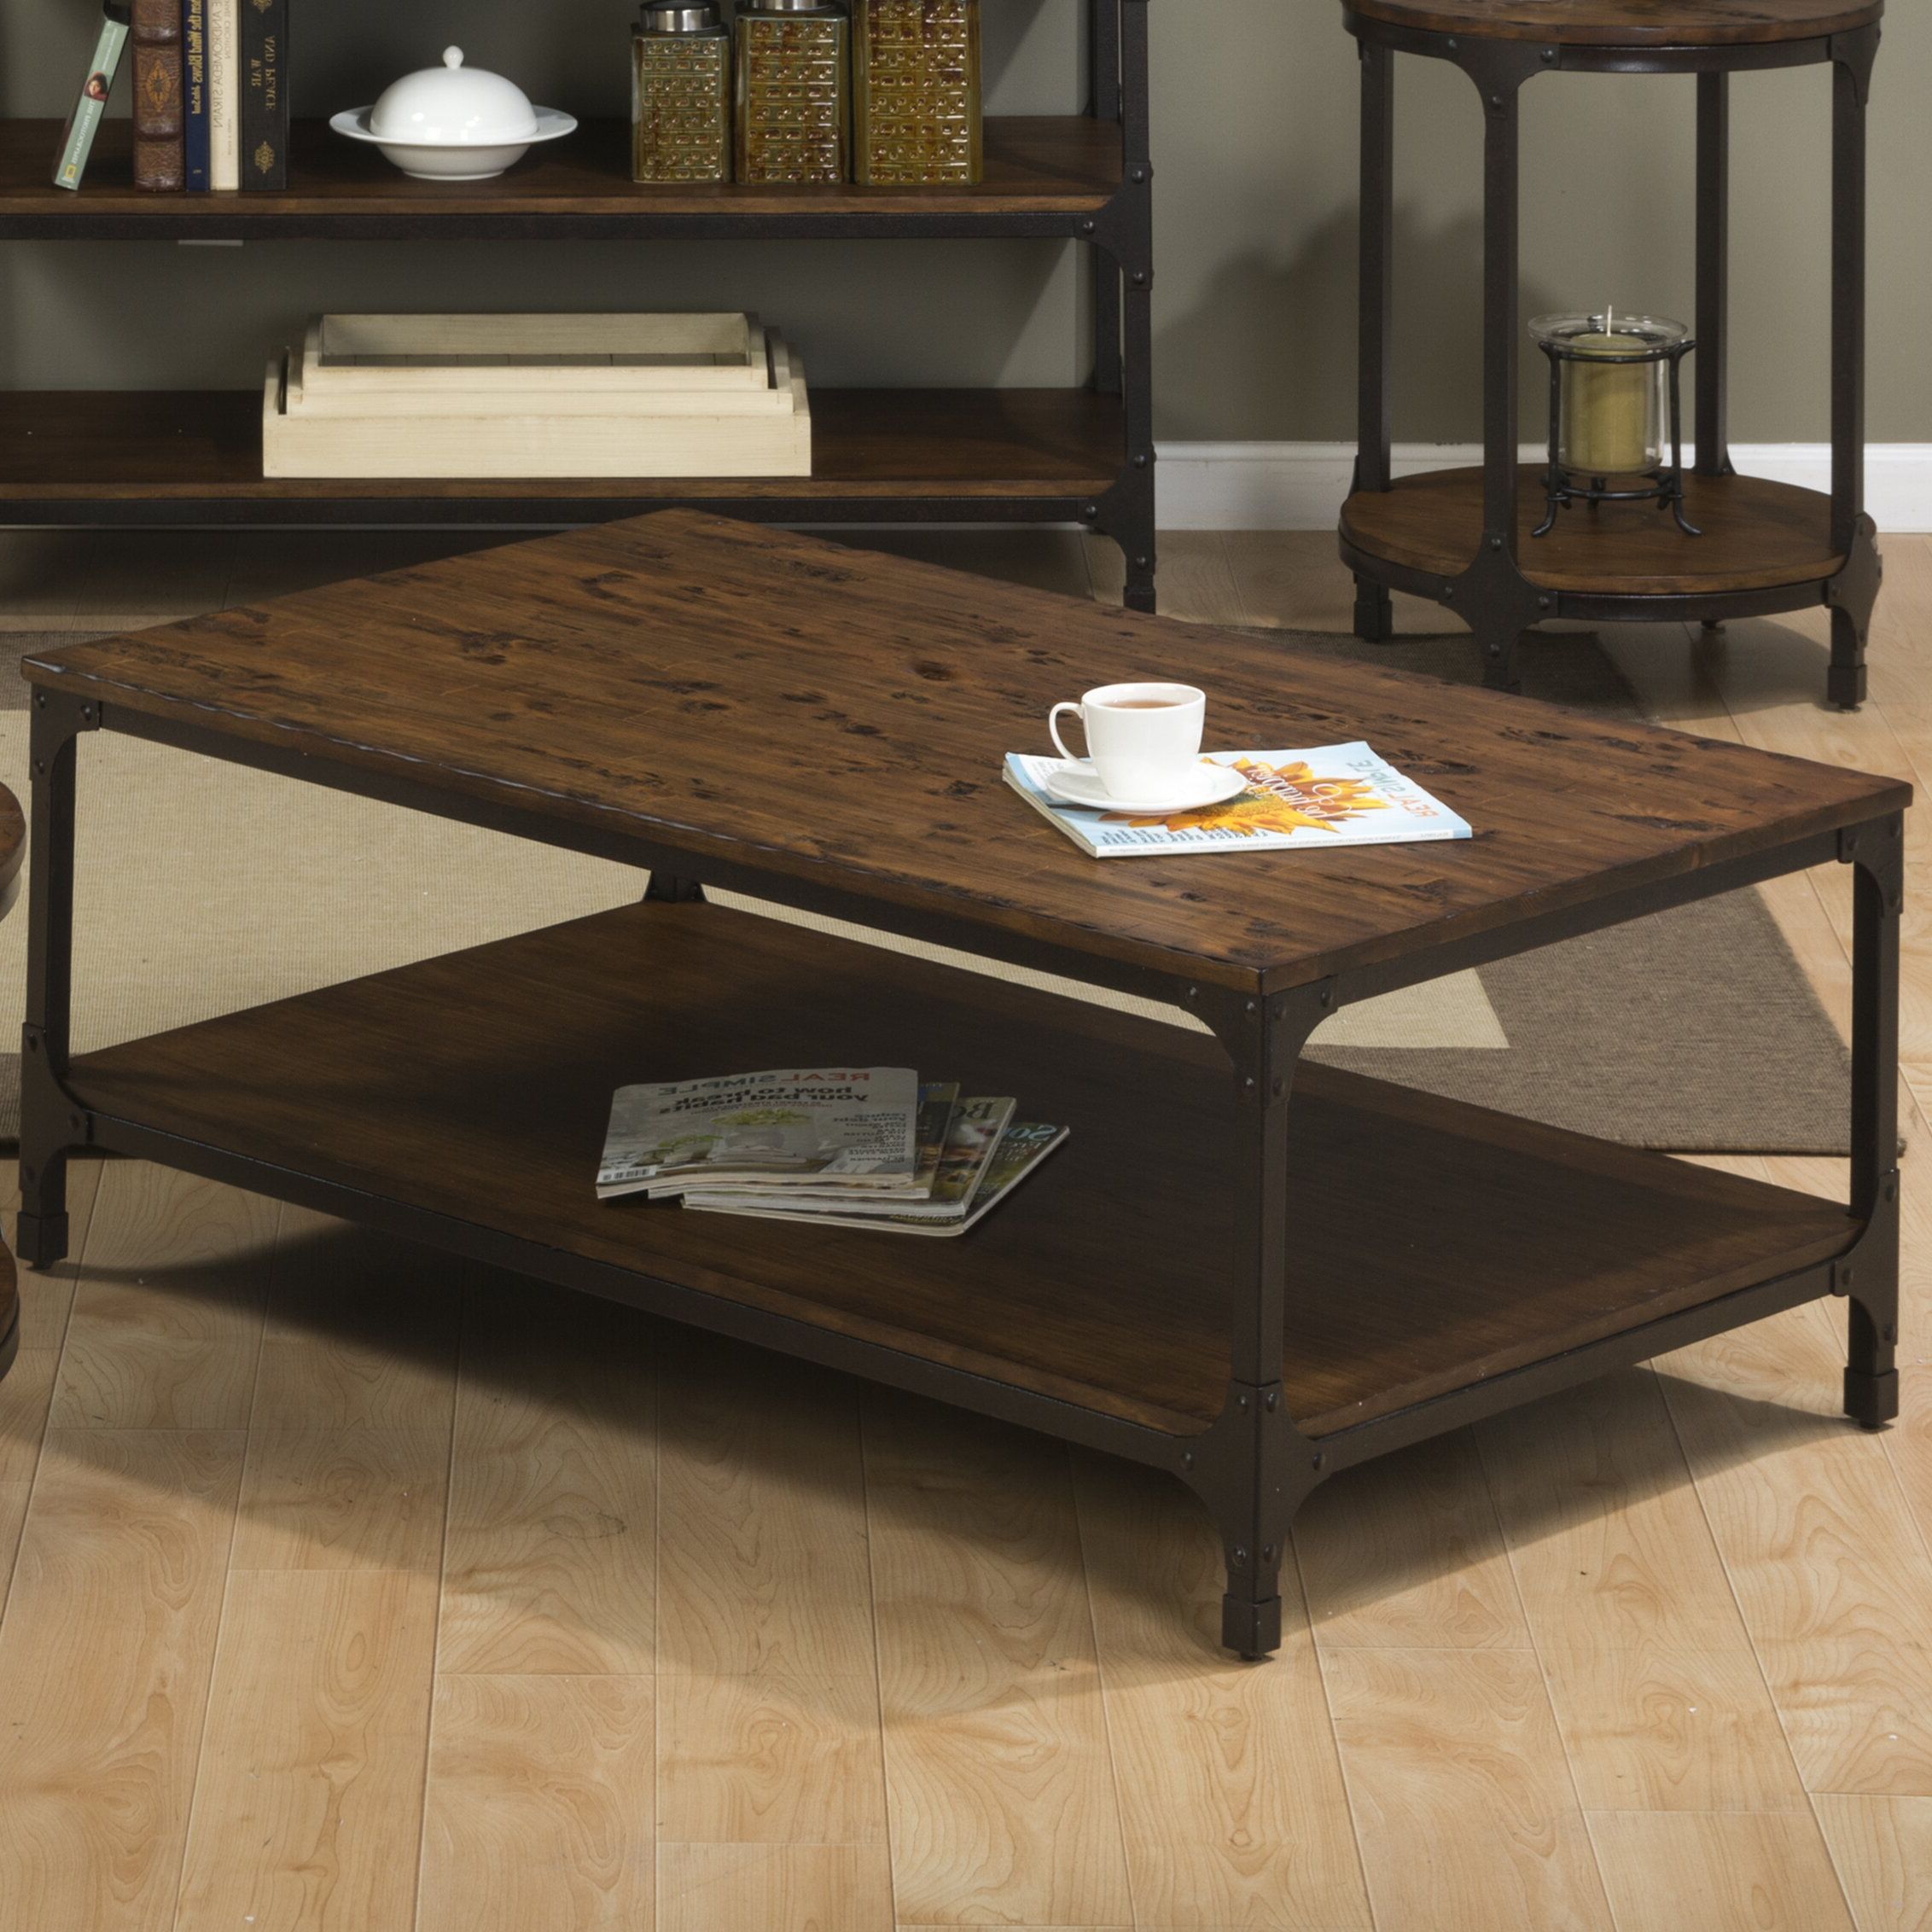 Wayfair Intended For Modern Farmhouse Coffee Table Sets (View 12 of 15)